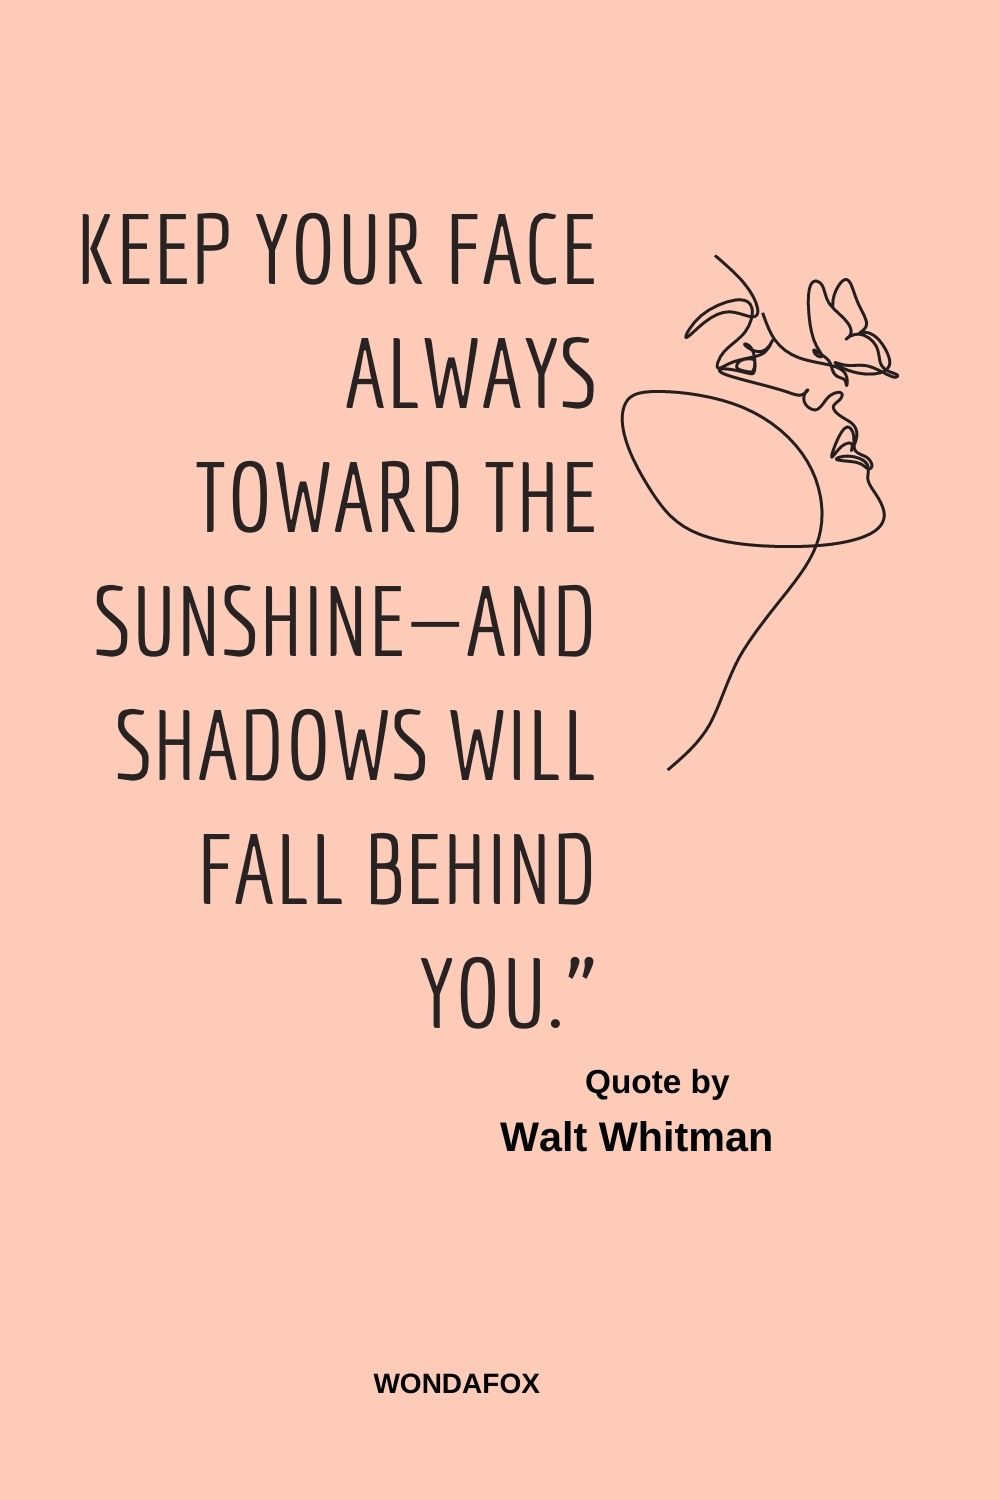 Short Positive Quotes  Keep your face always toward the sunshine—and shadows will fall behind you.”
Walt Whitman